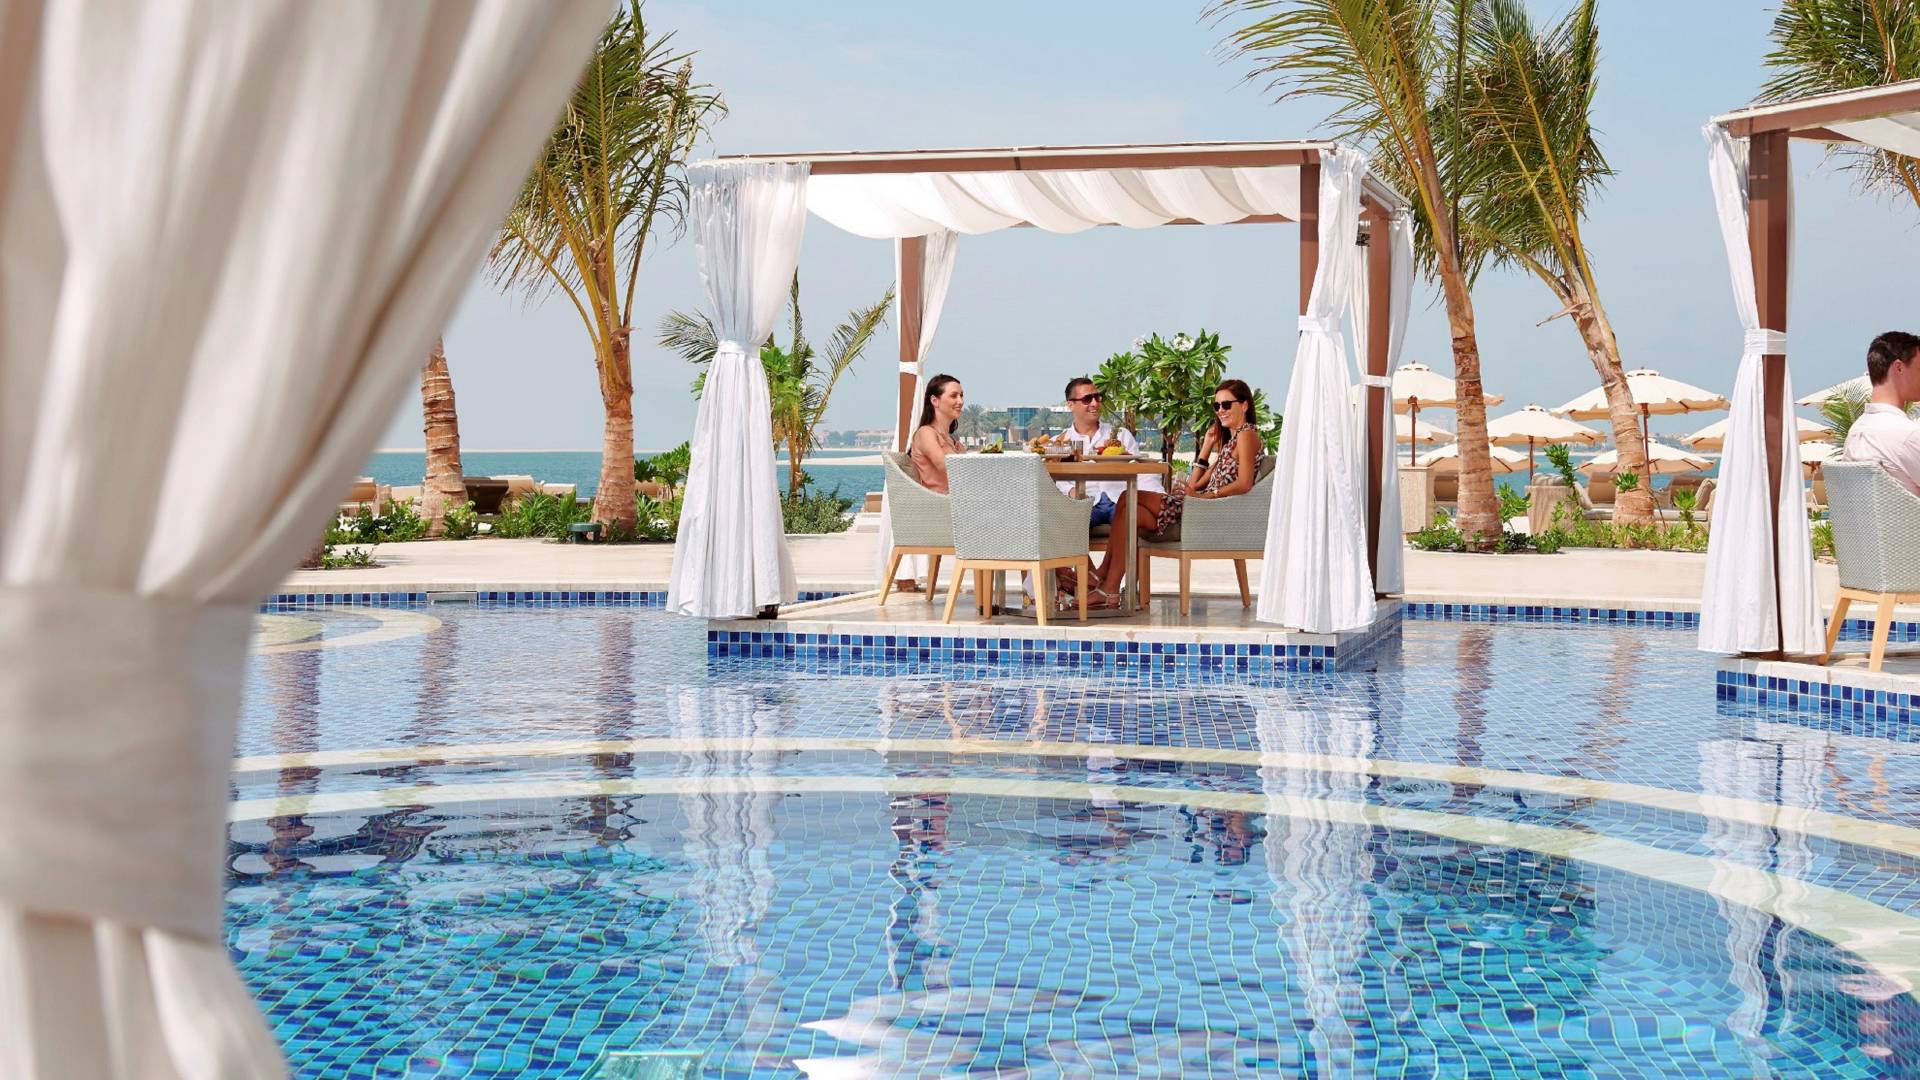 People dining in pool cabanas